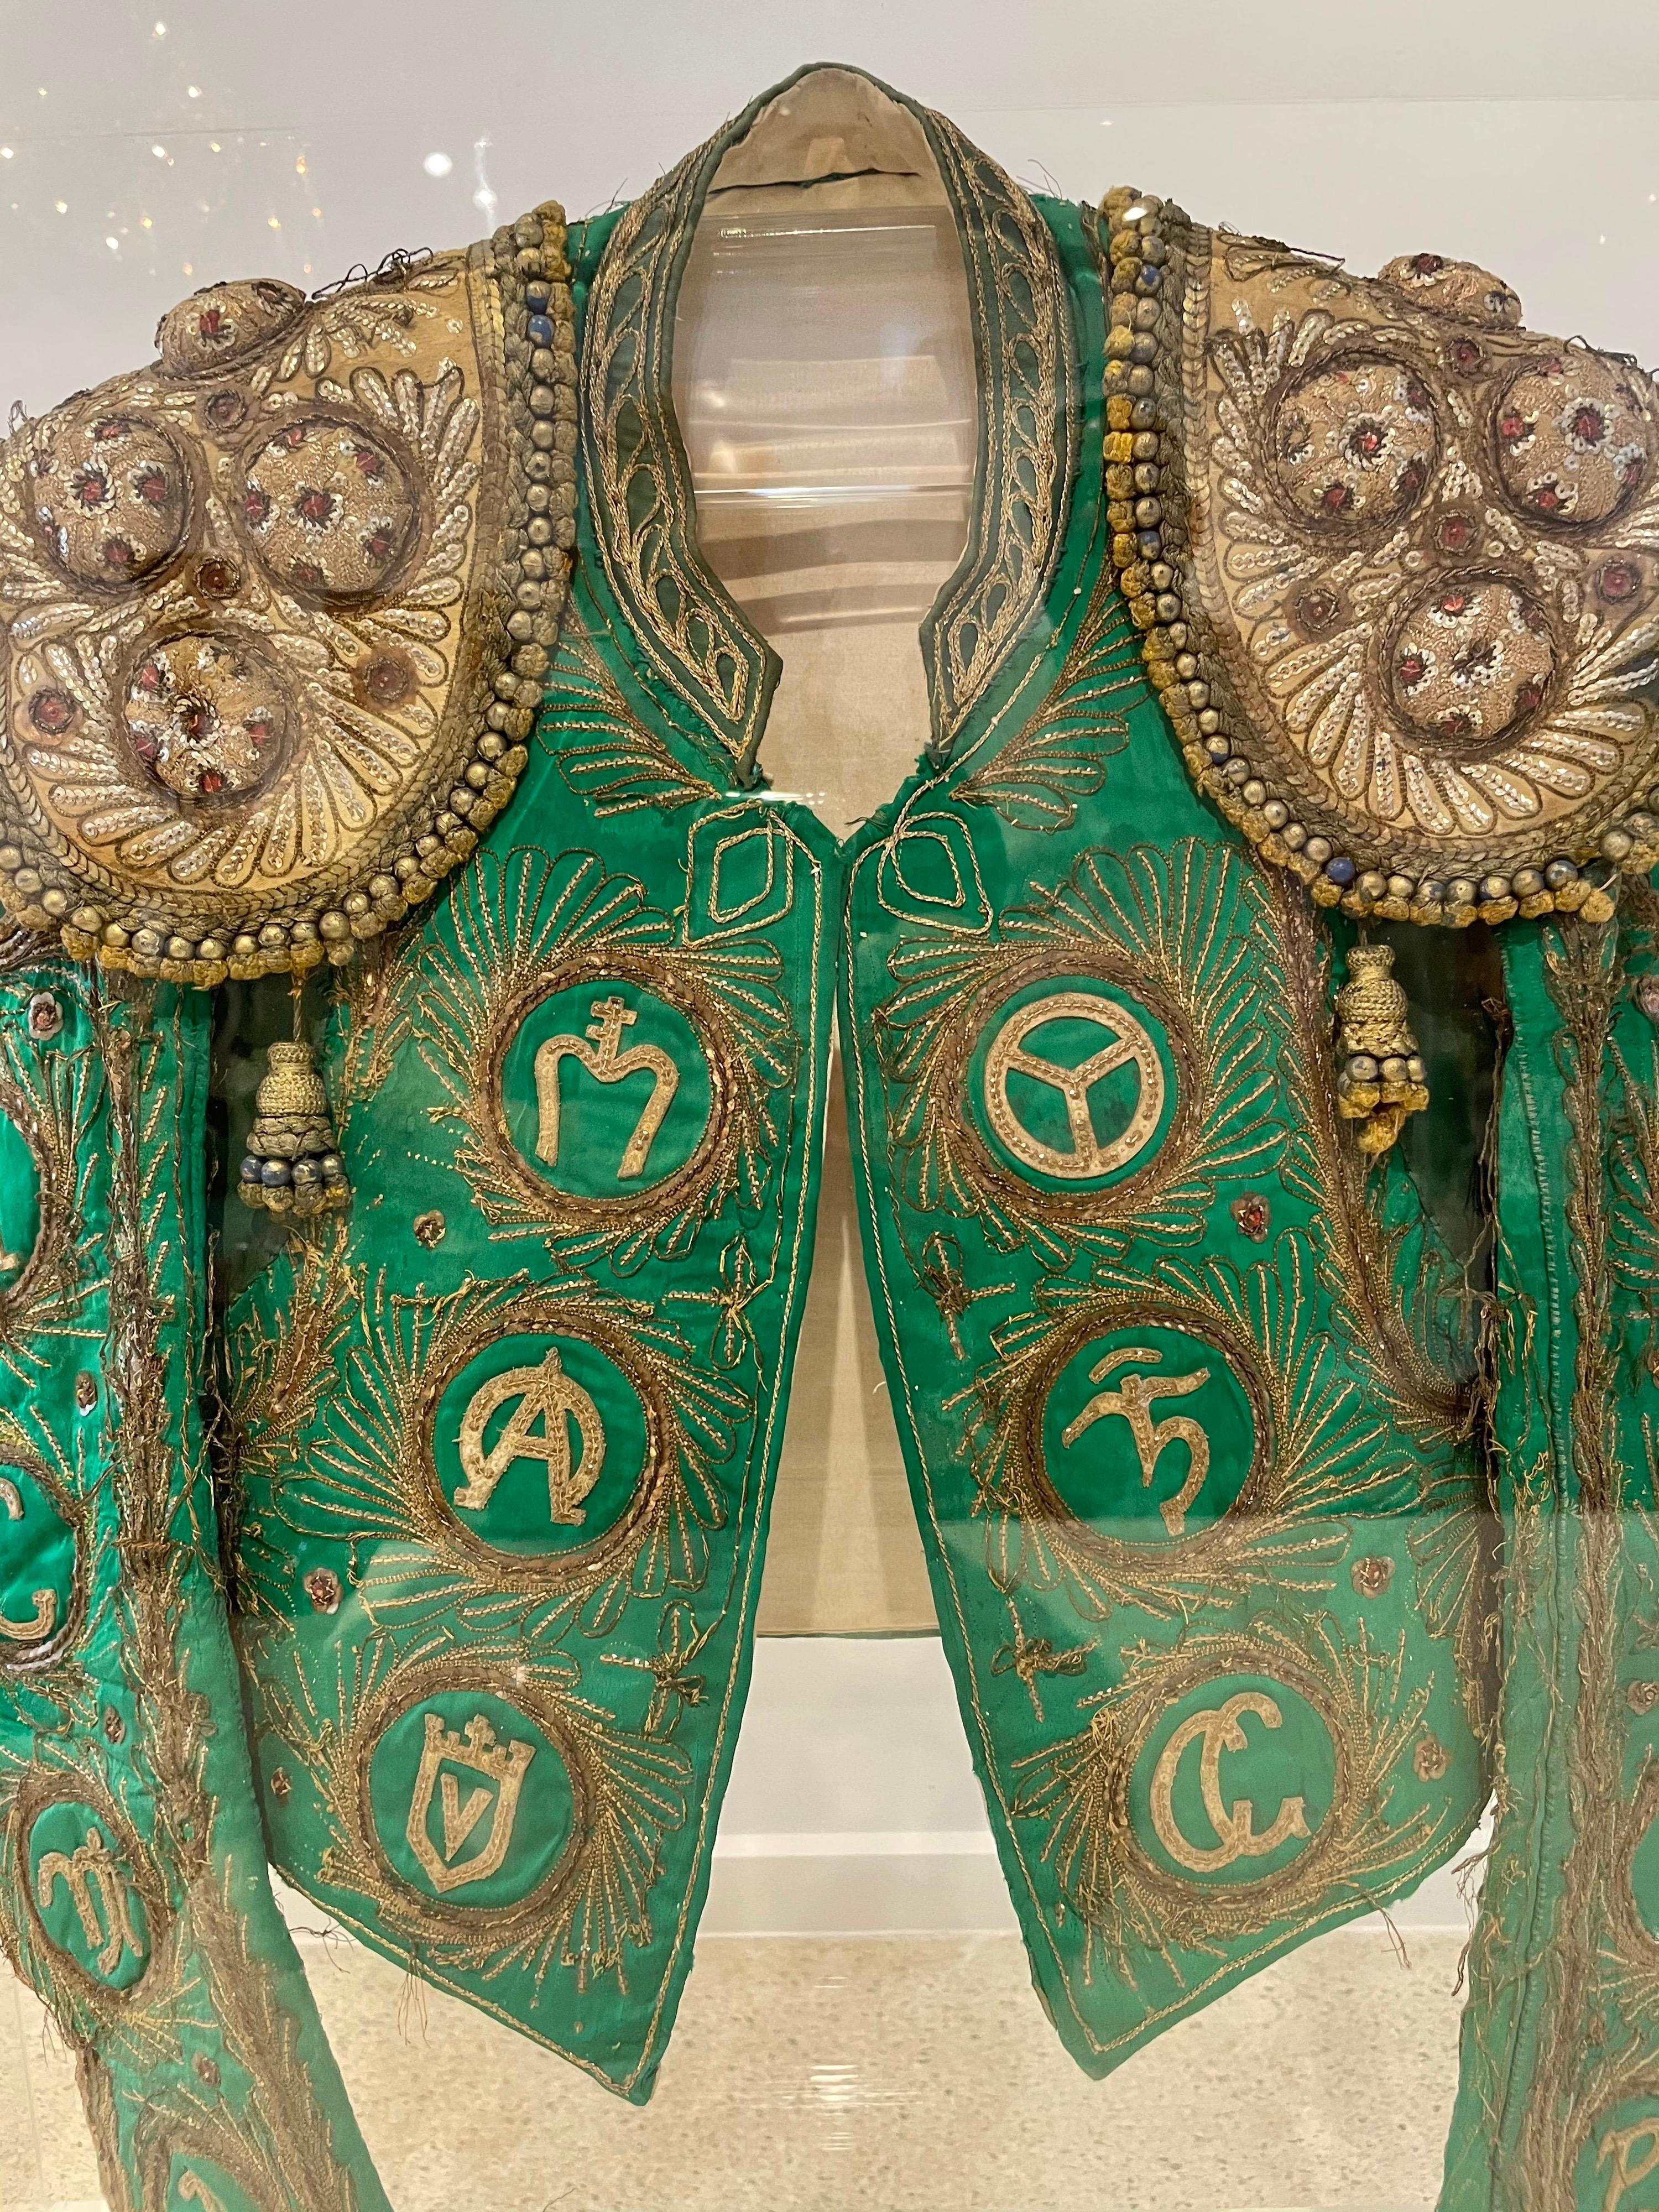 Encased in a magnificent acrylic display box, this very luxe, rare, antique embellished bull fighter's jacket (Traje de Toreador) with detailed embroidery and separate epaulettes. 

This vibrant green Toreador jacket is a unique piece which is